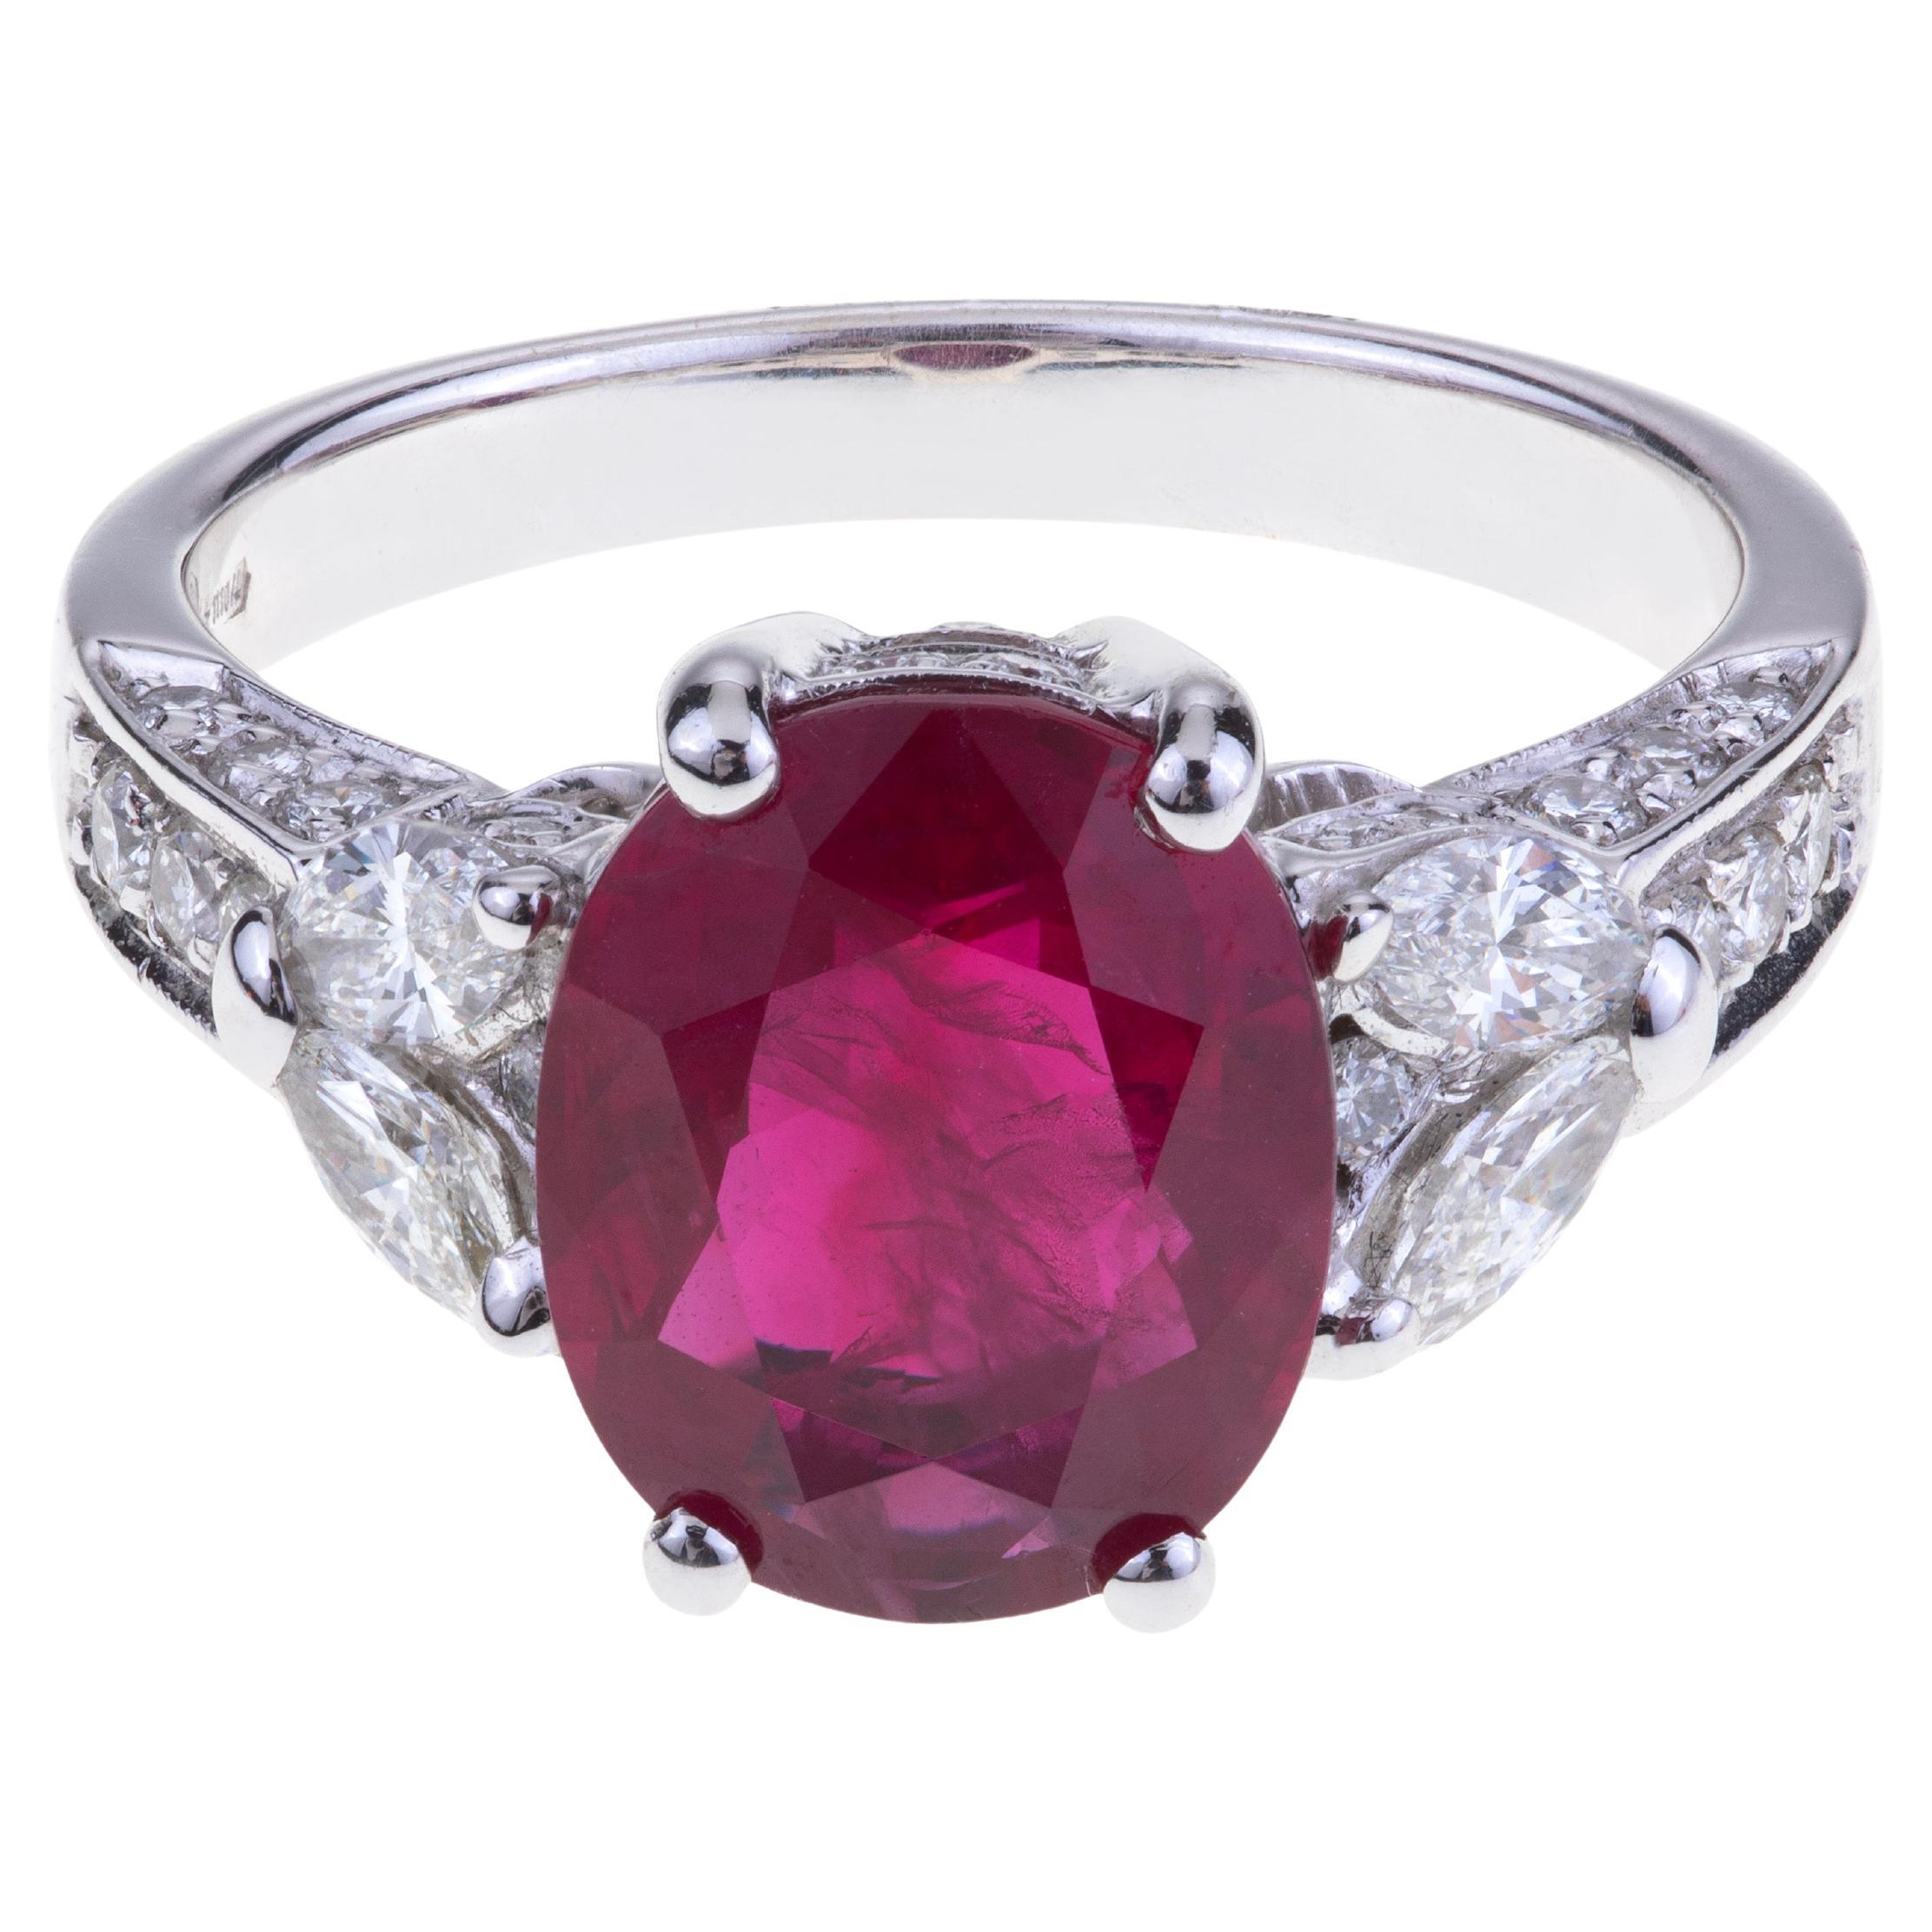 Stunning Oval Ruby Ring ct. 4.10 with Diamonds. Unique Stone.